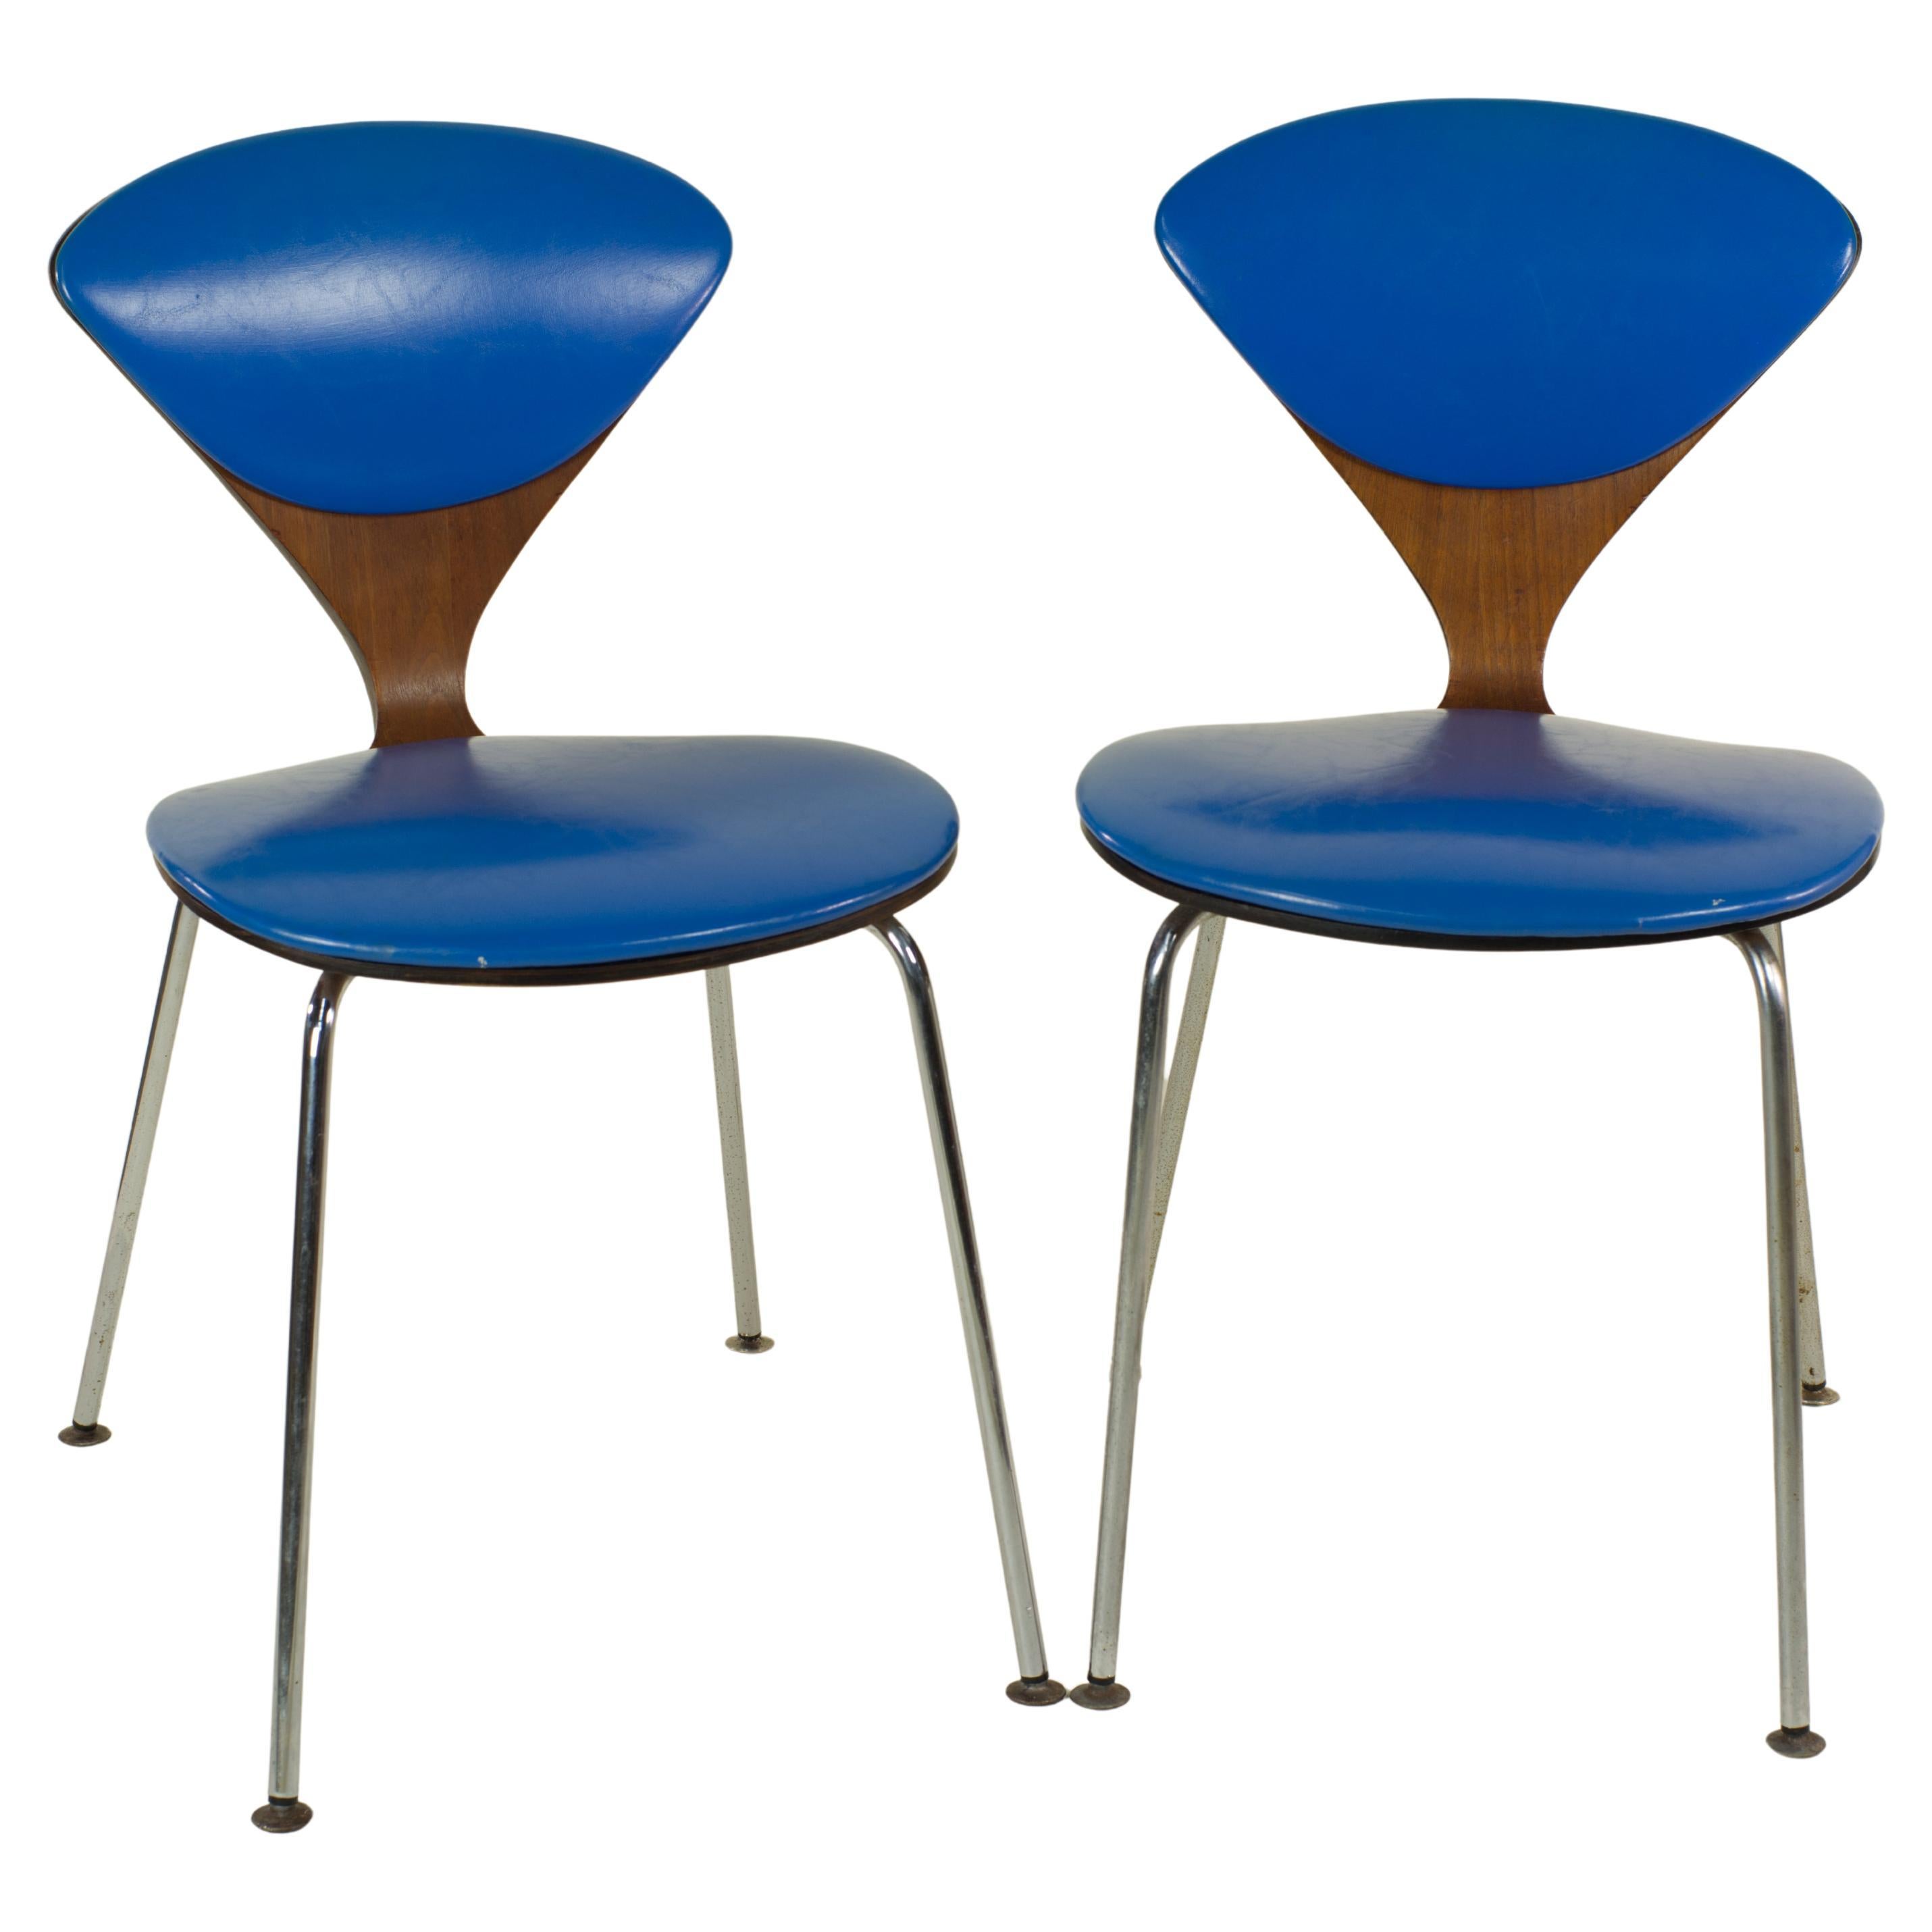 Pair of original Norman Cherner for Plycraft side-chairs, Mid-Century Modern